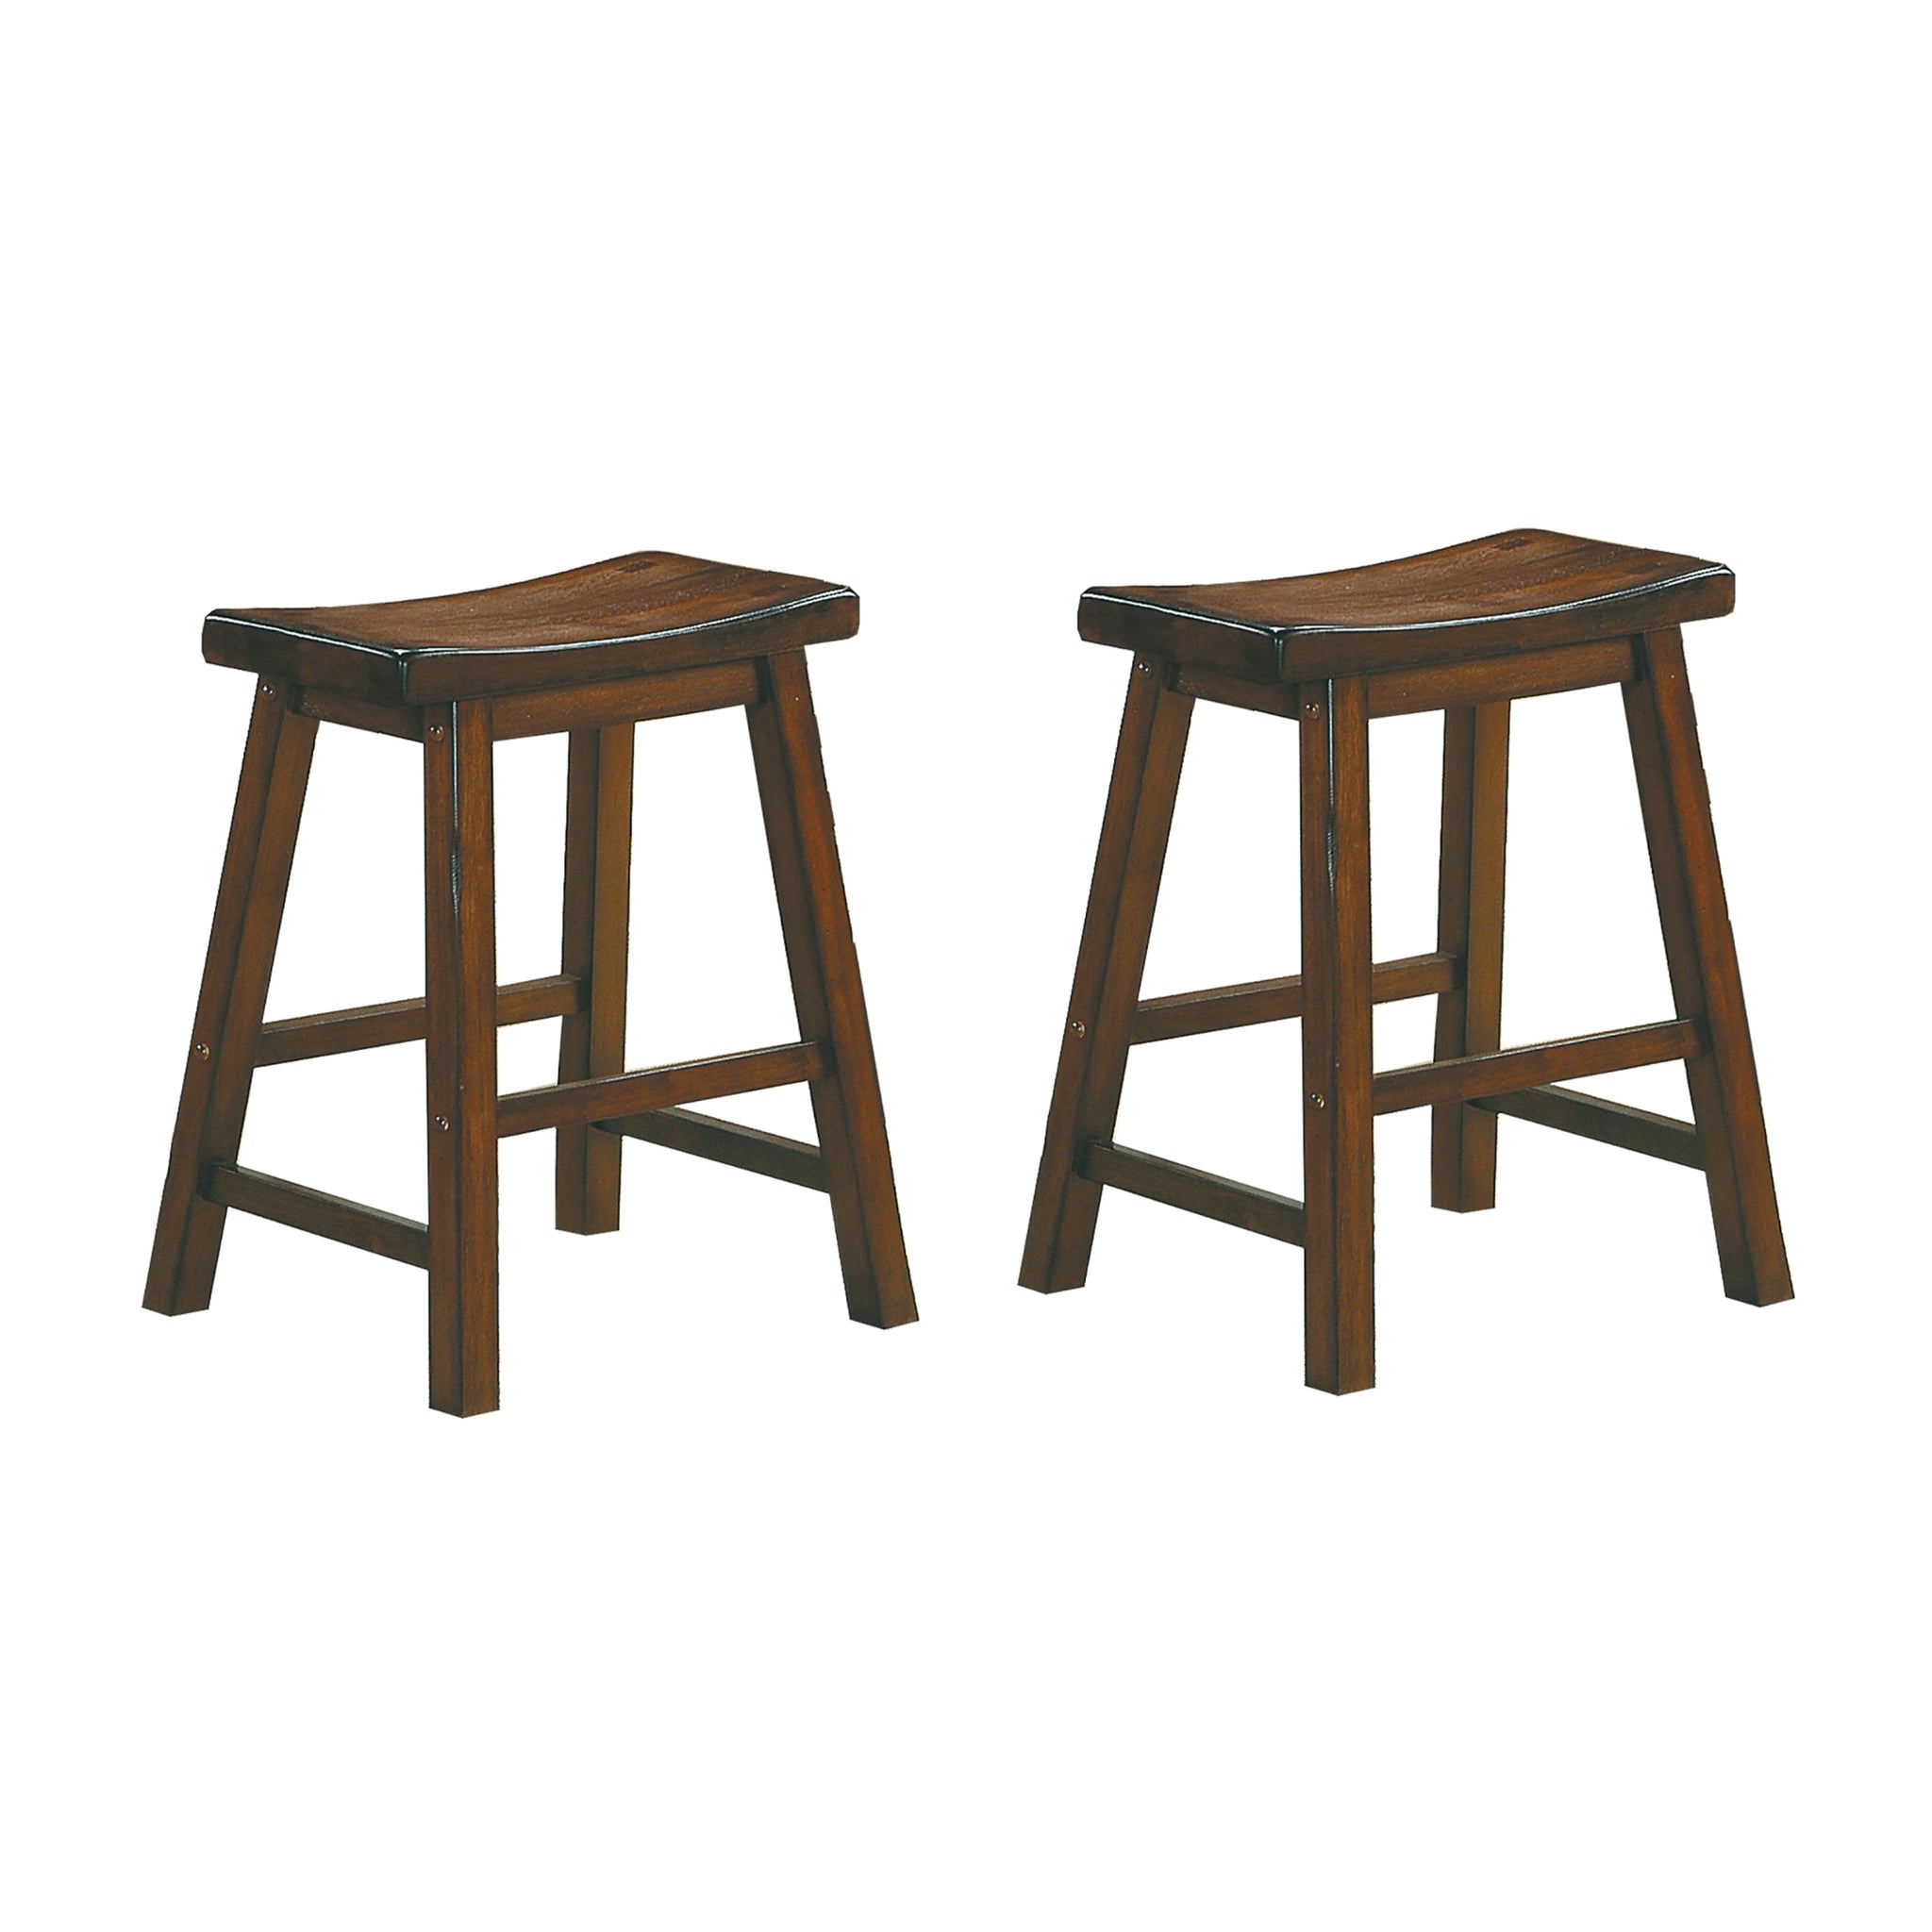 18 inch Height Saddle Seat Stools 2pc Set Solid Wood brown mix-dining room-solid wood